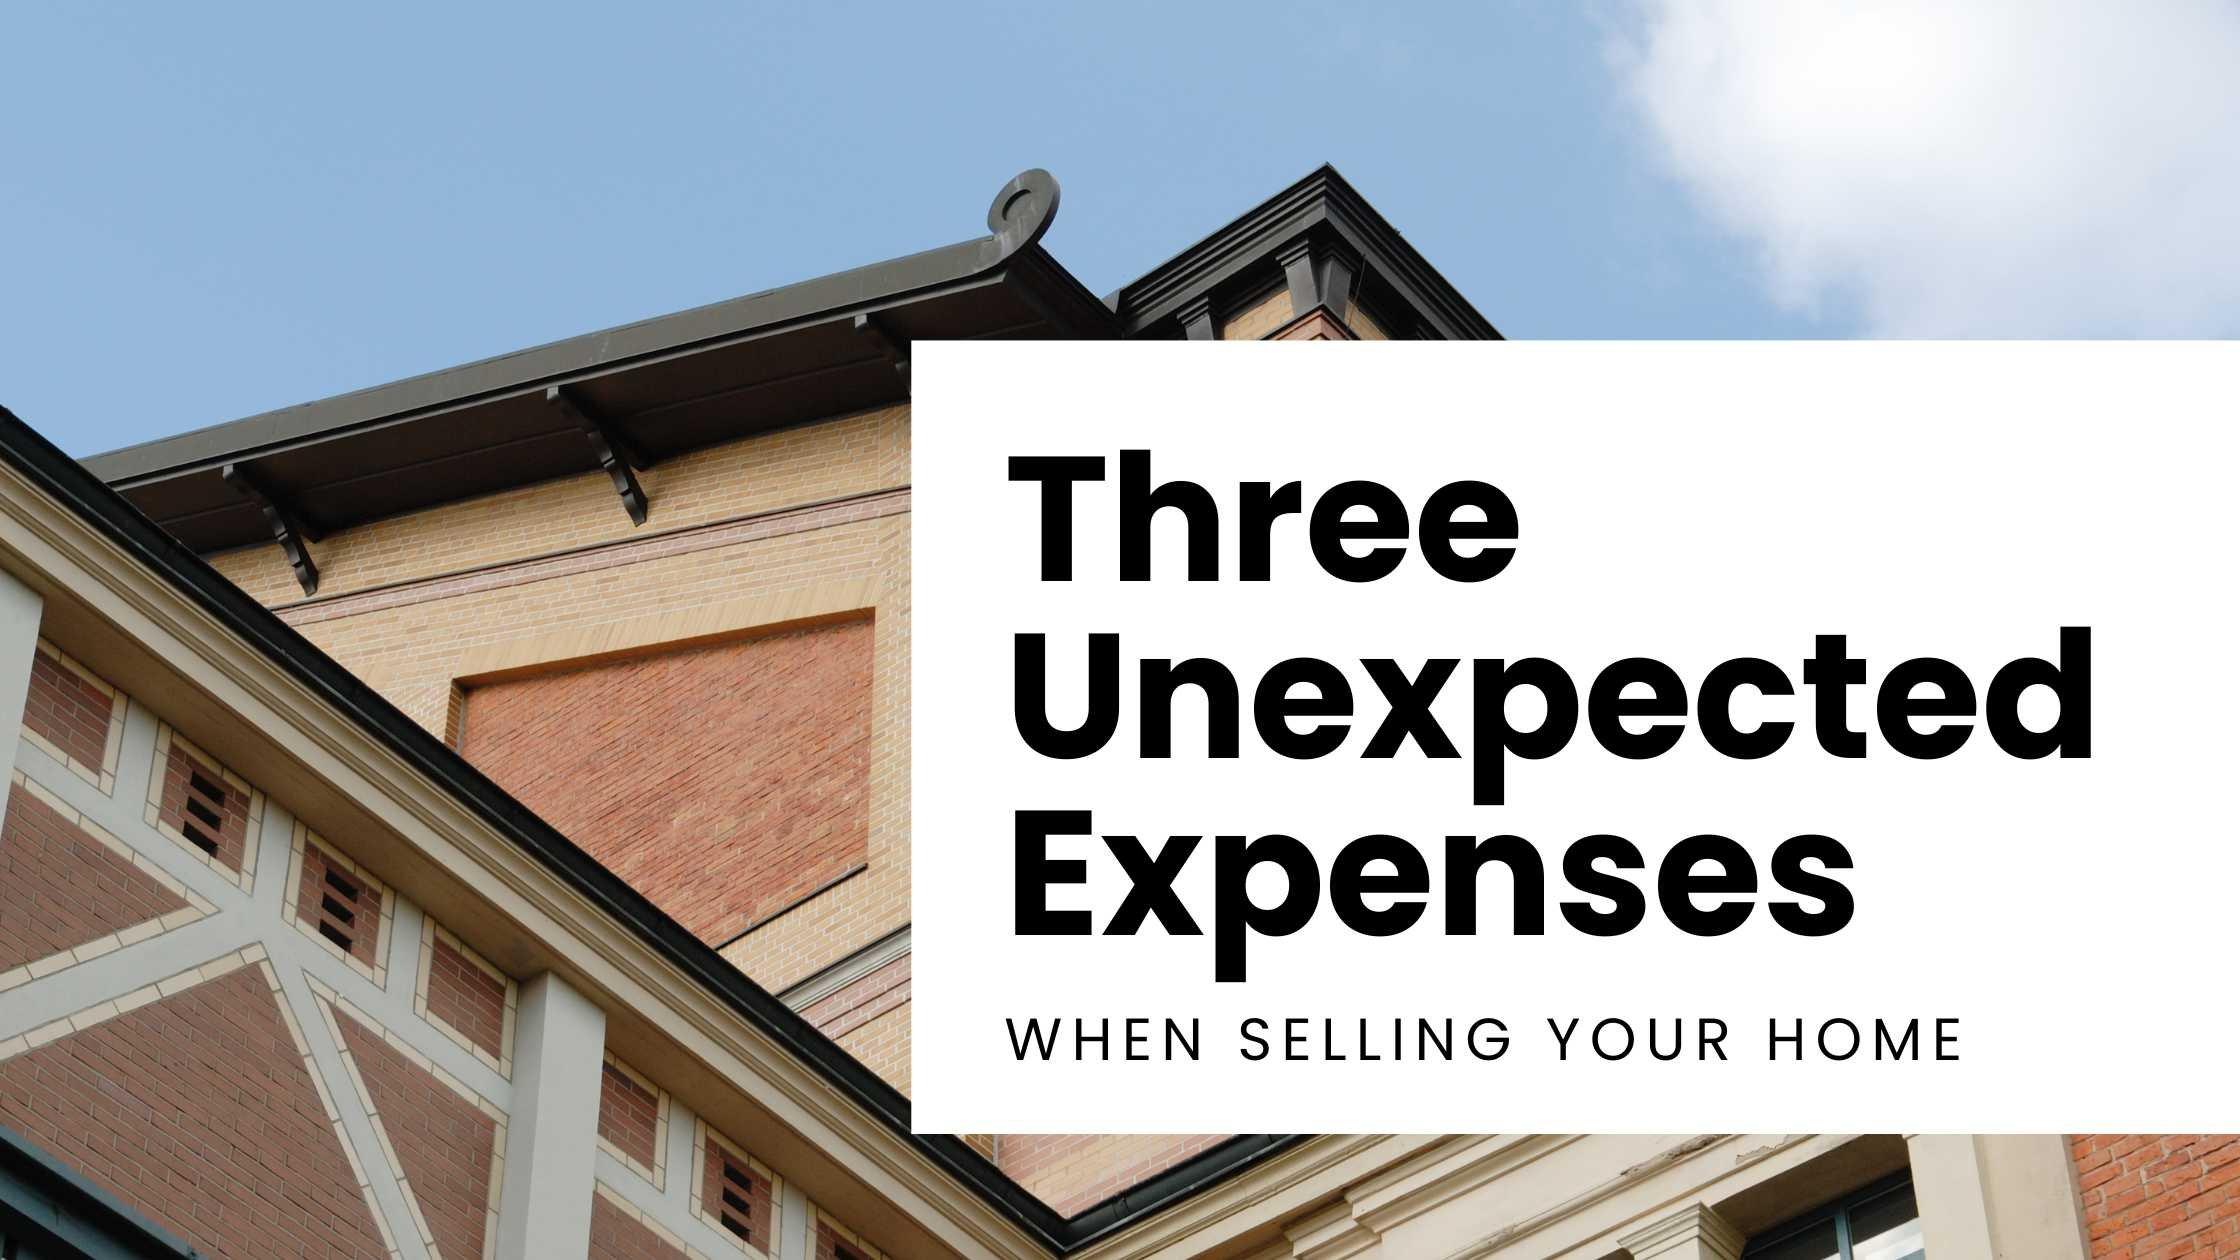 The Three Unexpected Expenses You’ll Face When Selling Your Home in Hampton Roads, VA